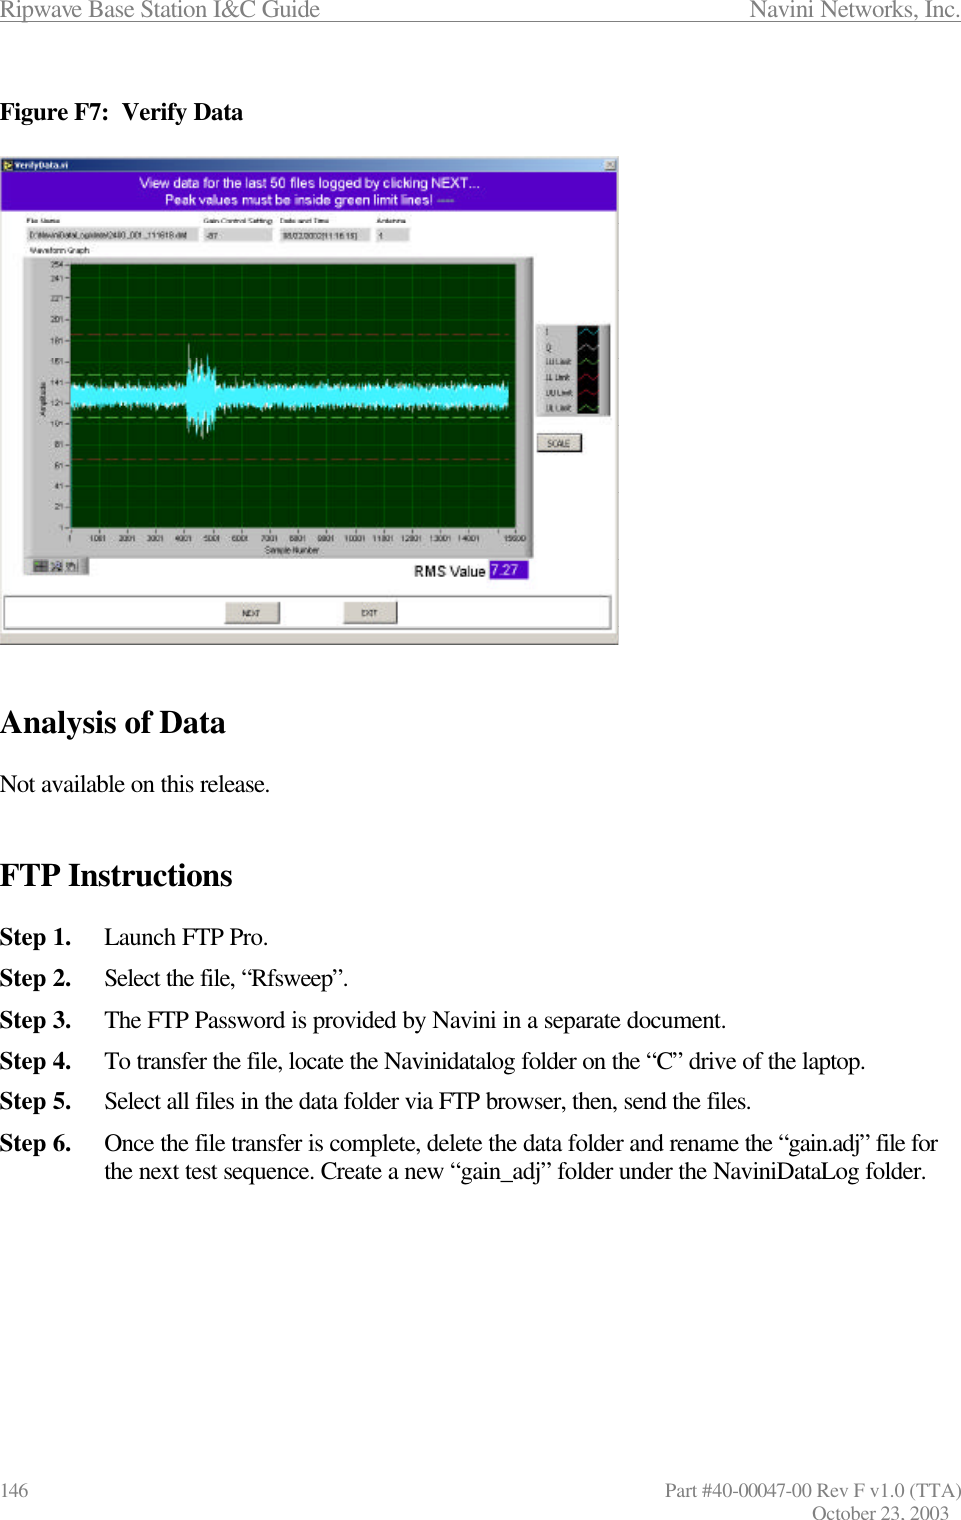 Ripwave Base Station I&amp;C Guide                 Navini Networks, Inc. 146                      Part #40-00047-00 Rev F v1.0 (TTA) October 23, 2003  Figure F7:  Verify Data                     Analysis of Data  Not available on this release.   FTP Instructions  Step 1. Launch FTP Pro. Step 2. Select the file, “Rfsweep”. Step 3. The FTP Password is provided by Navini in a separate document. Step 4. To transfer the file, locate the Navinidatalog folder on the “C” drive of the laptop. Step 5. Select all files in the data folder via FTP browser, then, send the files. Step 6. Once the file transfer is complete, delete the data folder and rename the “gain.adj” file for the next test sequence. Create a new “gain_adj” folder under the NaviniDataLog folder. 